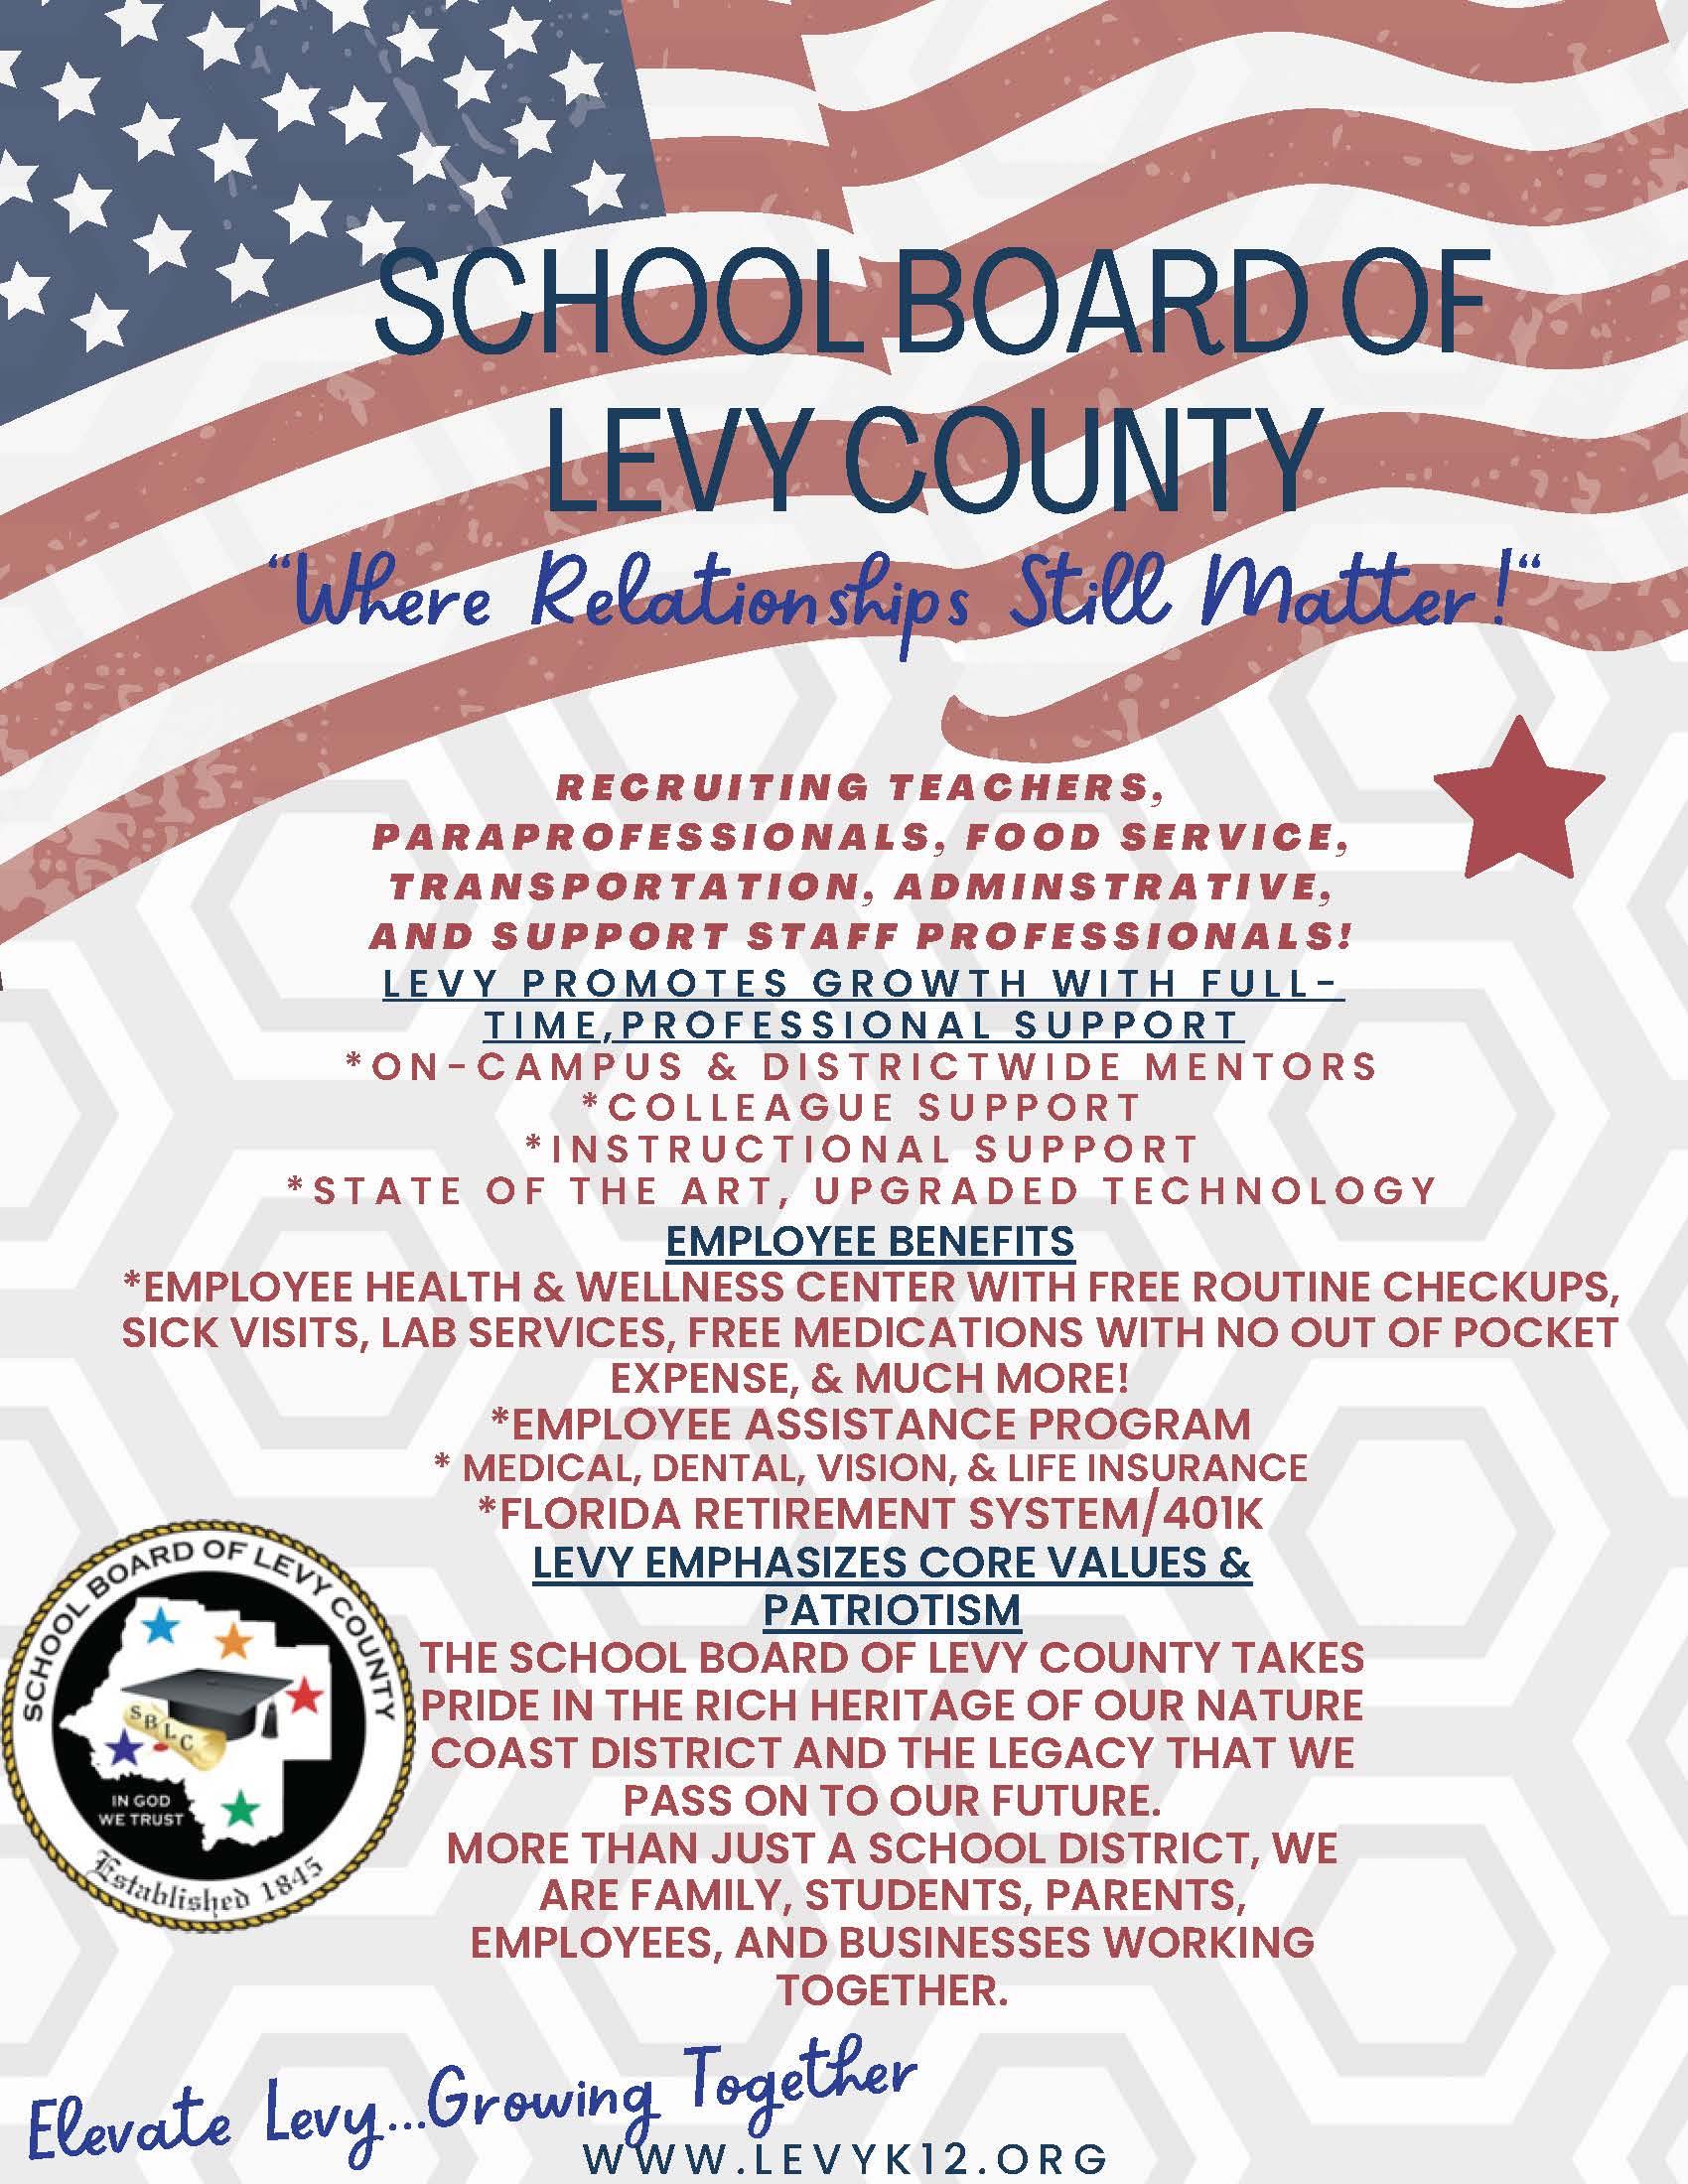 School Board of Levy County - Recruiting Teachers, Paraprofessionals, food service, transportation, administration, and support staff professionals